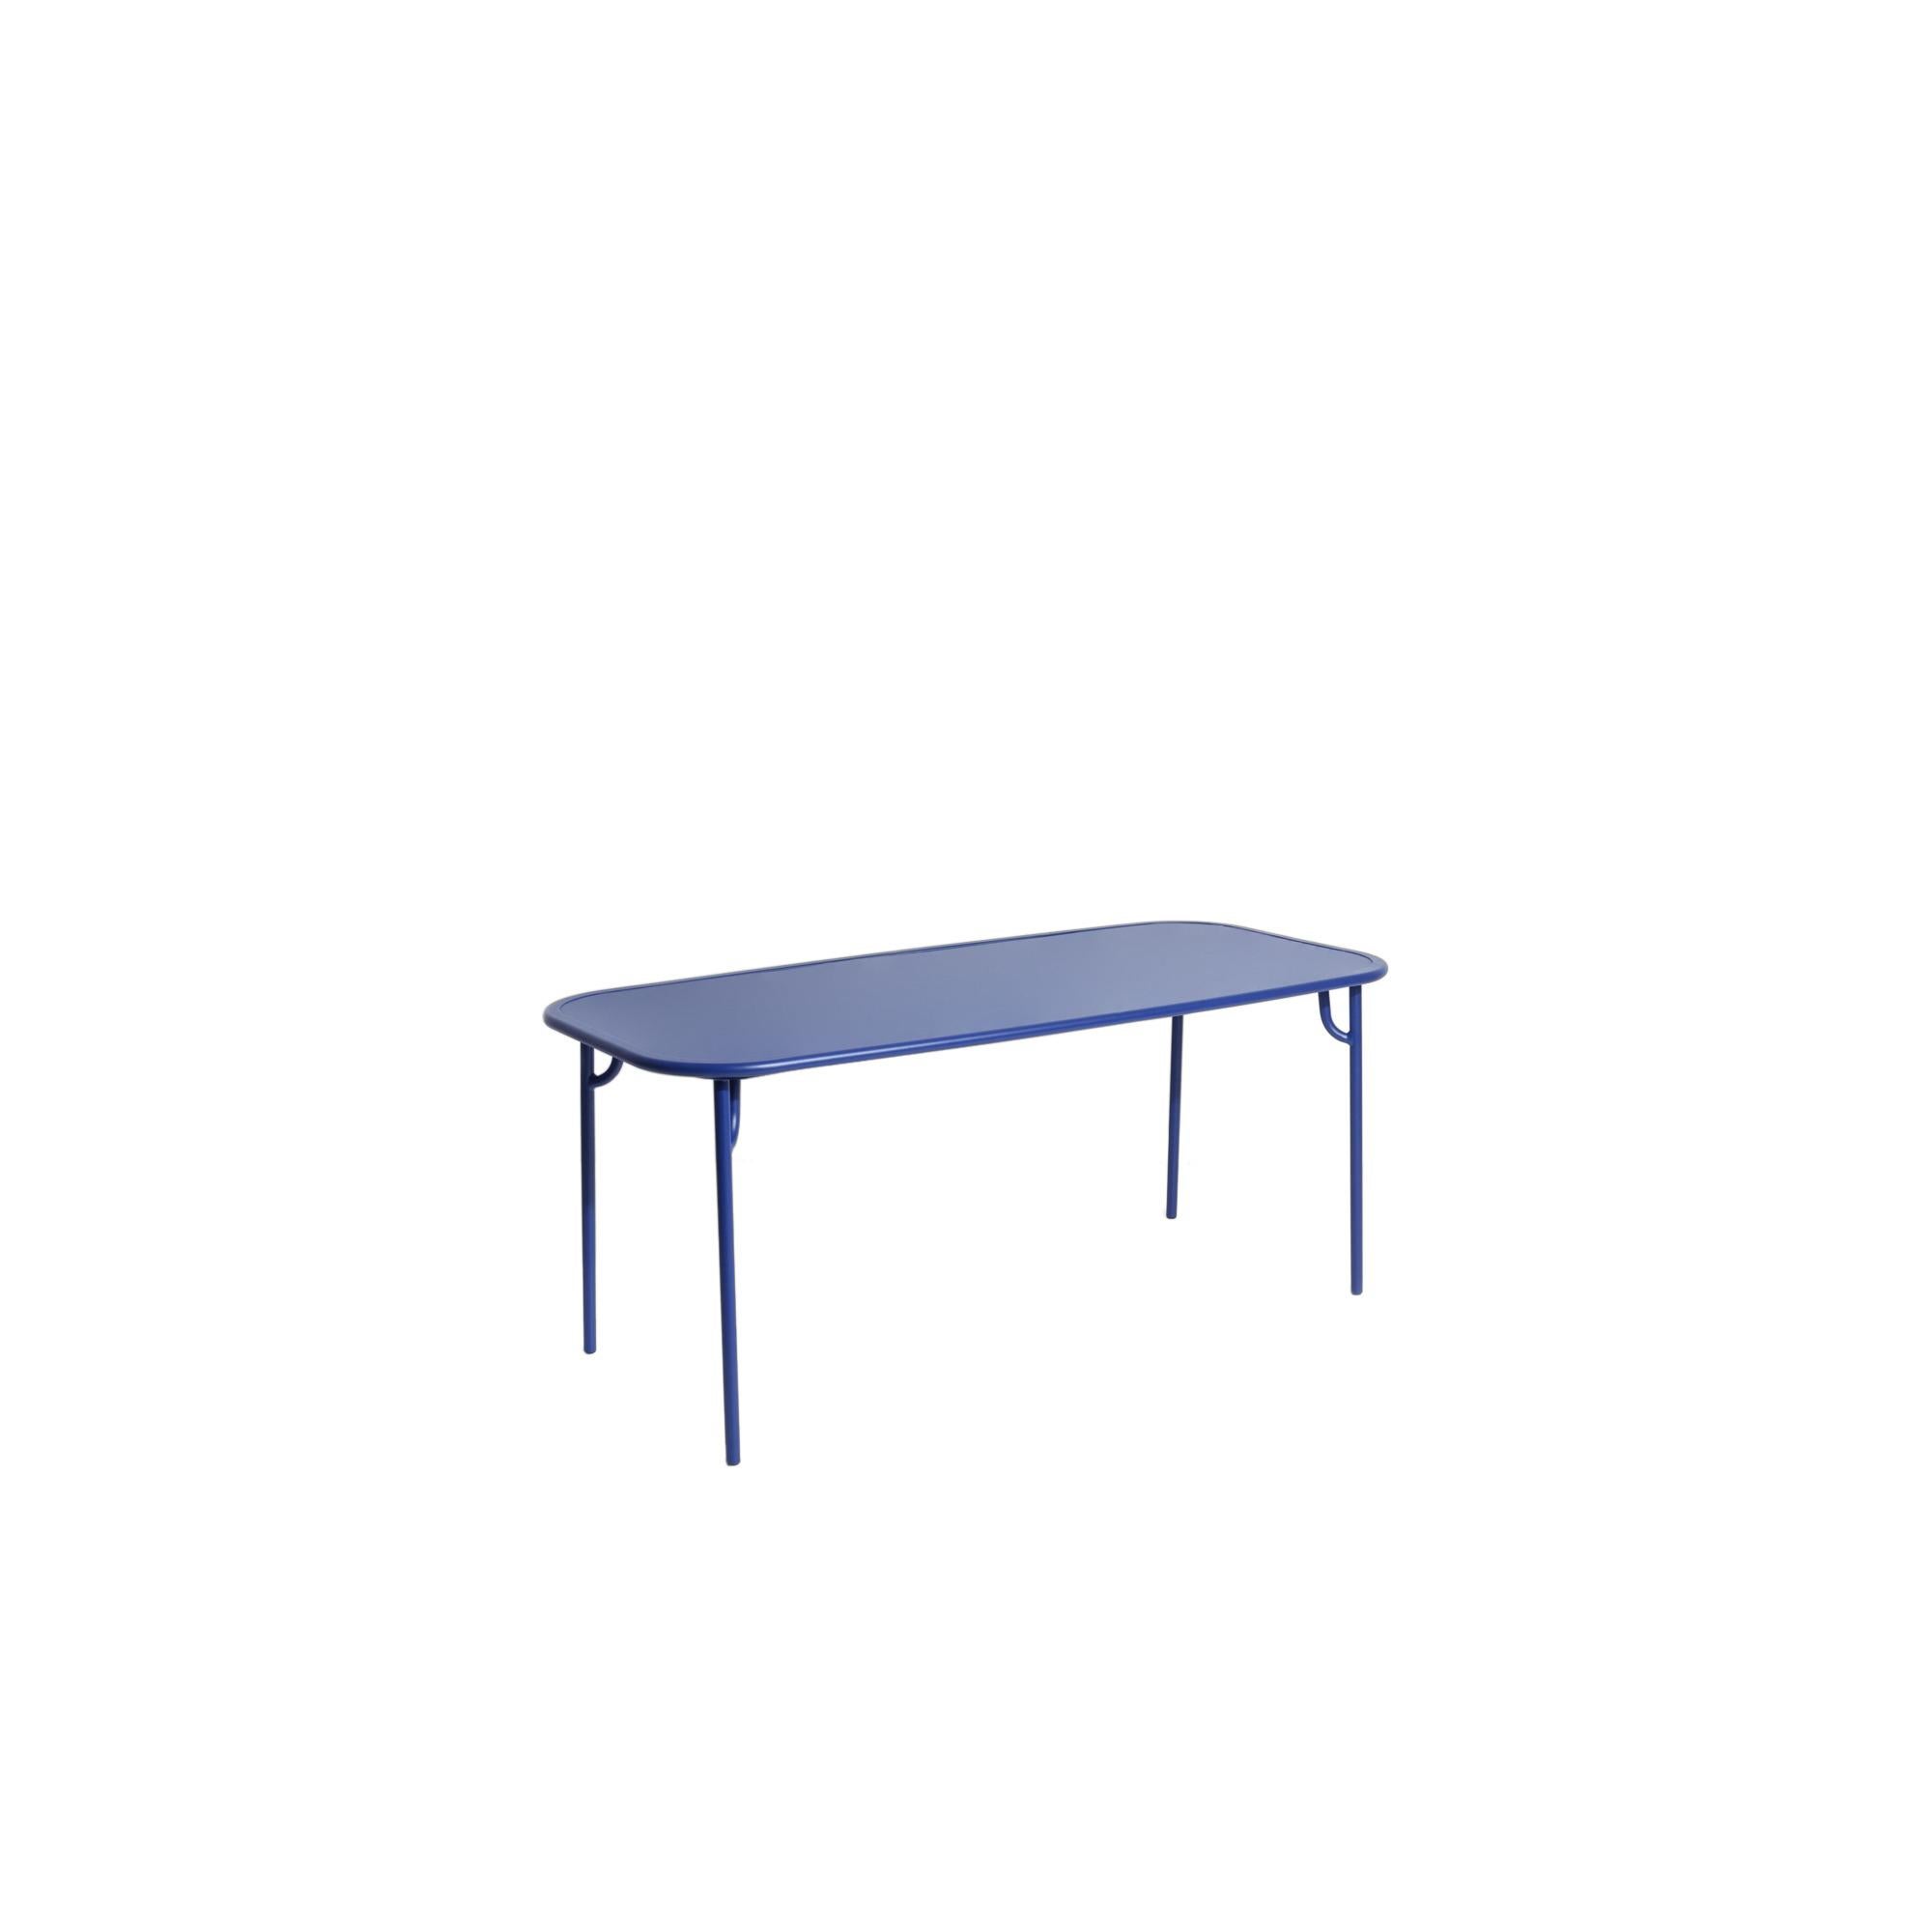 Petite Friture Week-End Medium Plain Rectangular Dining Table in Blue Aluminium by Studio BrichetZiegler, 2017

The week-end collection is a full range of outdoor furniture, in aluminium grained epoxy paint, matt finish, that includes 18 functions